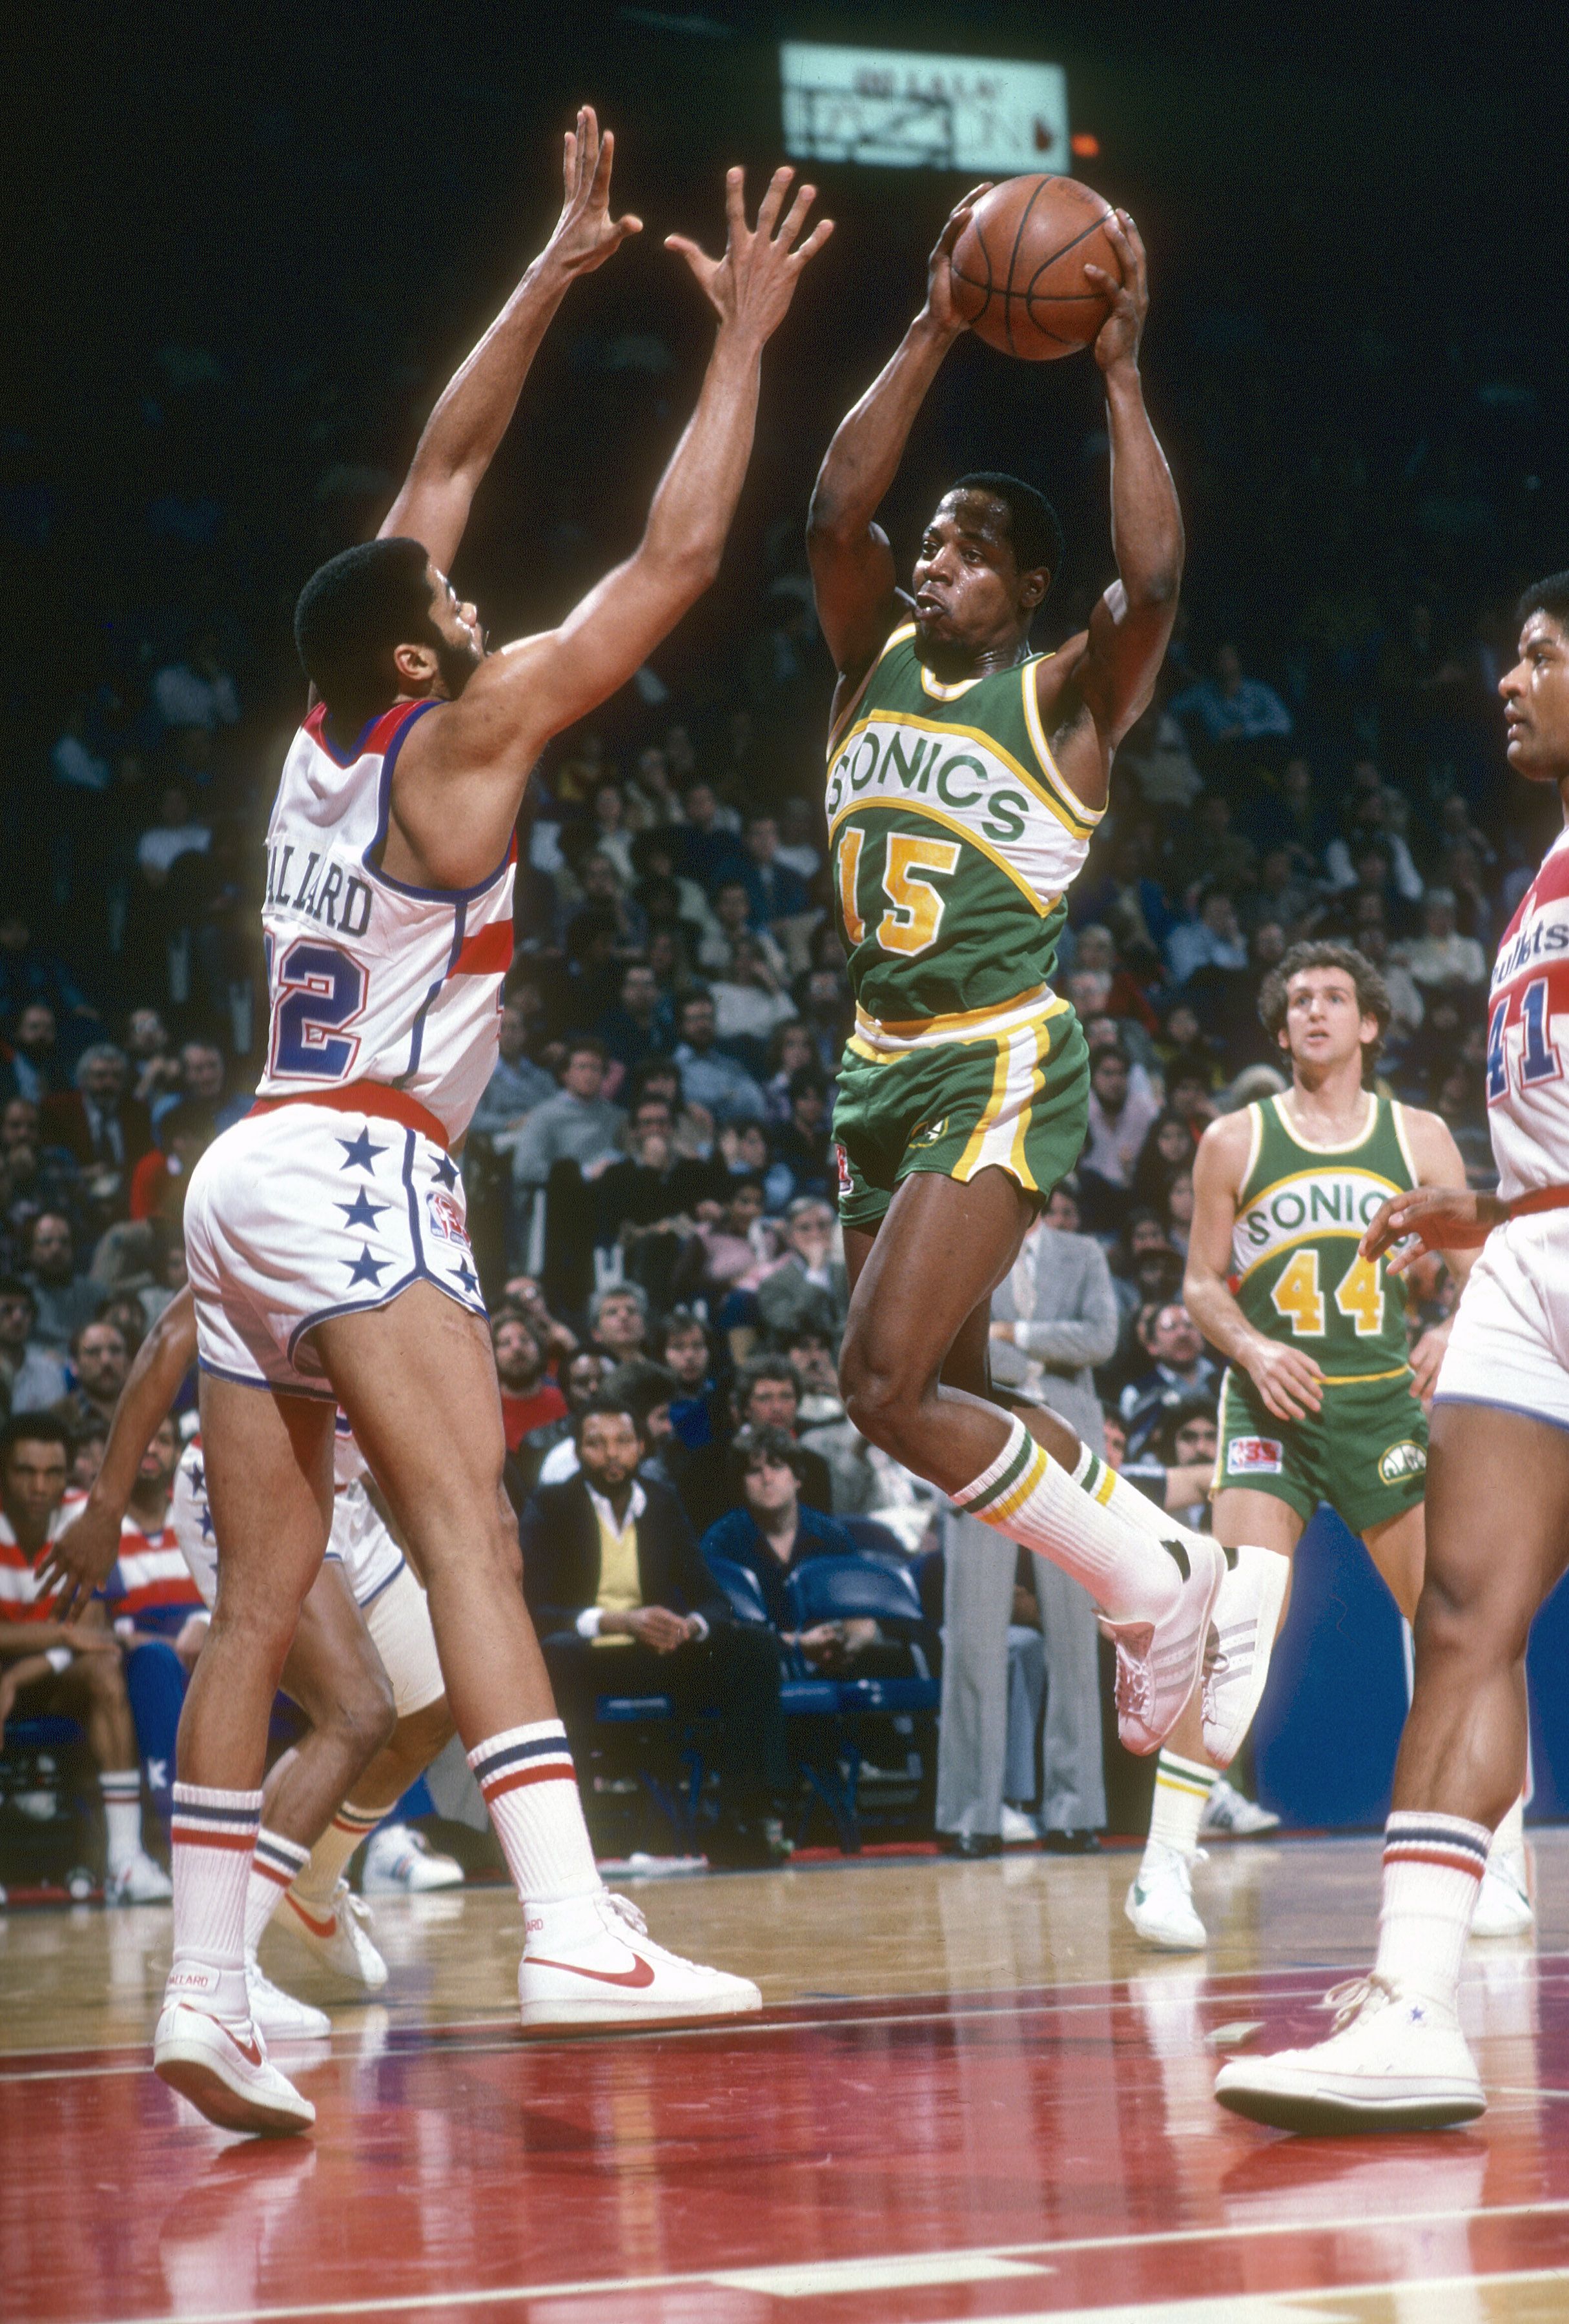 Sonics in-game action